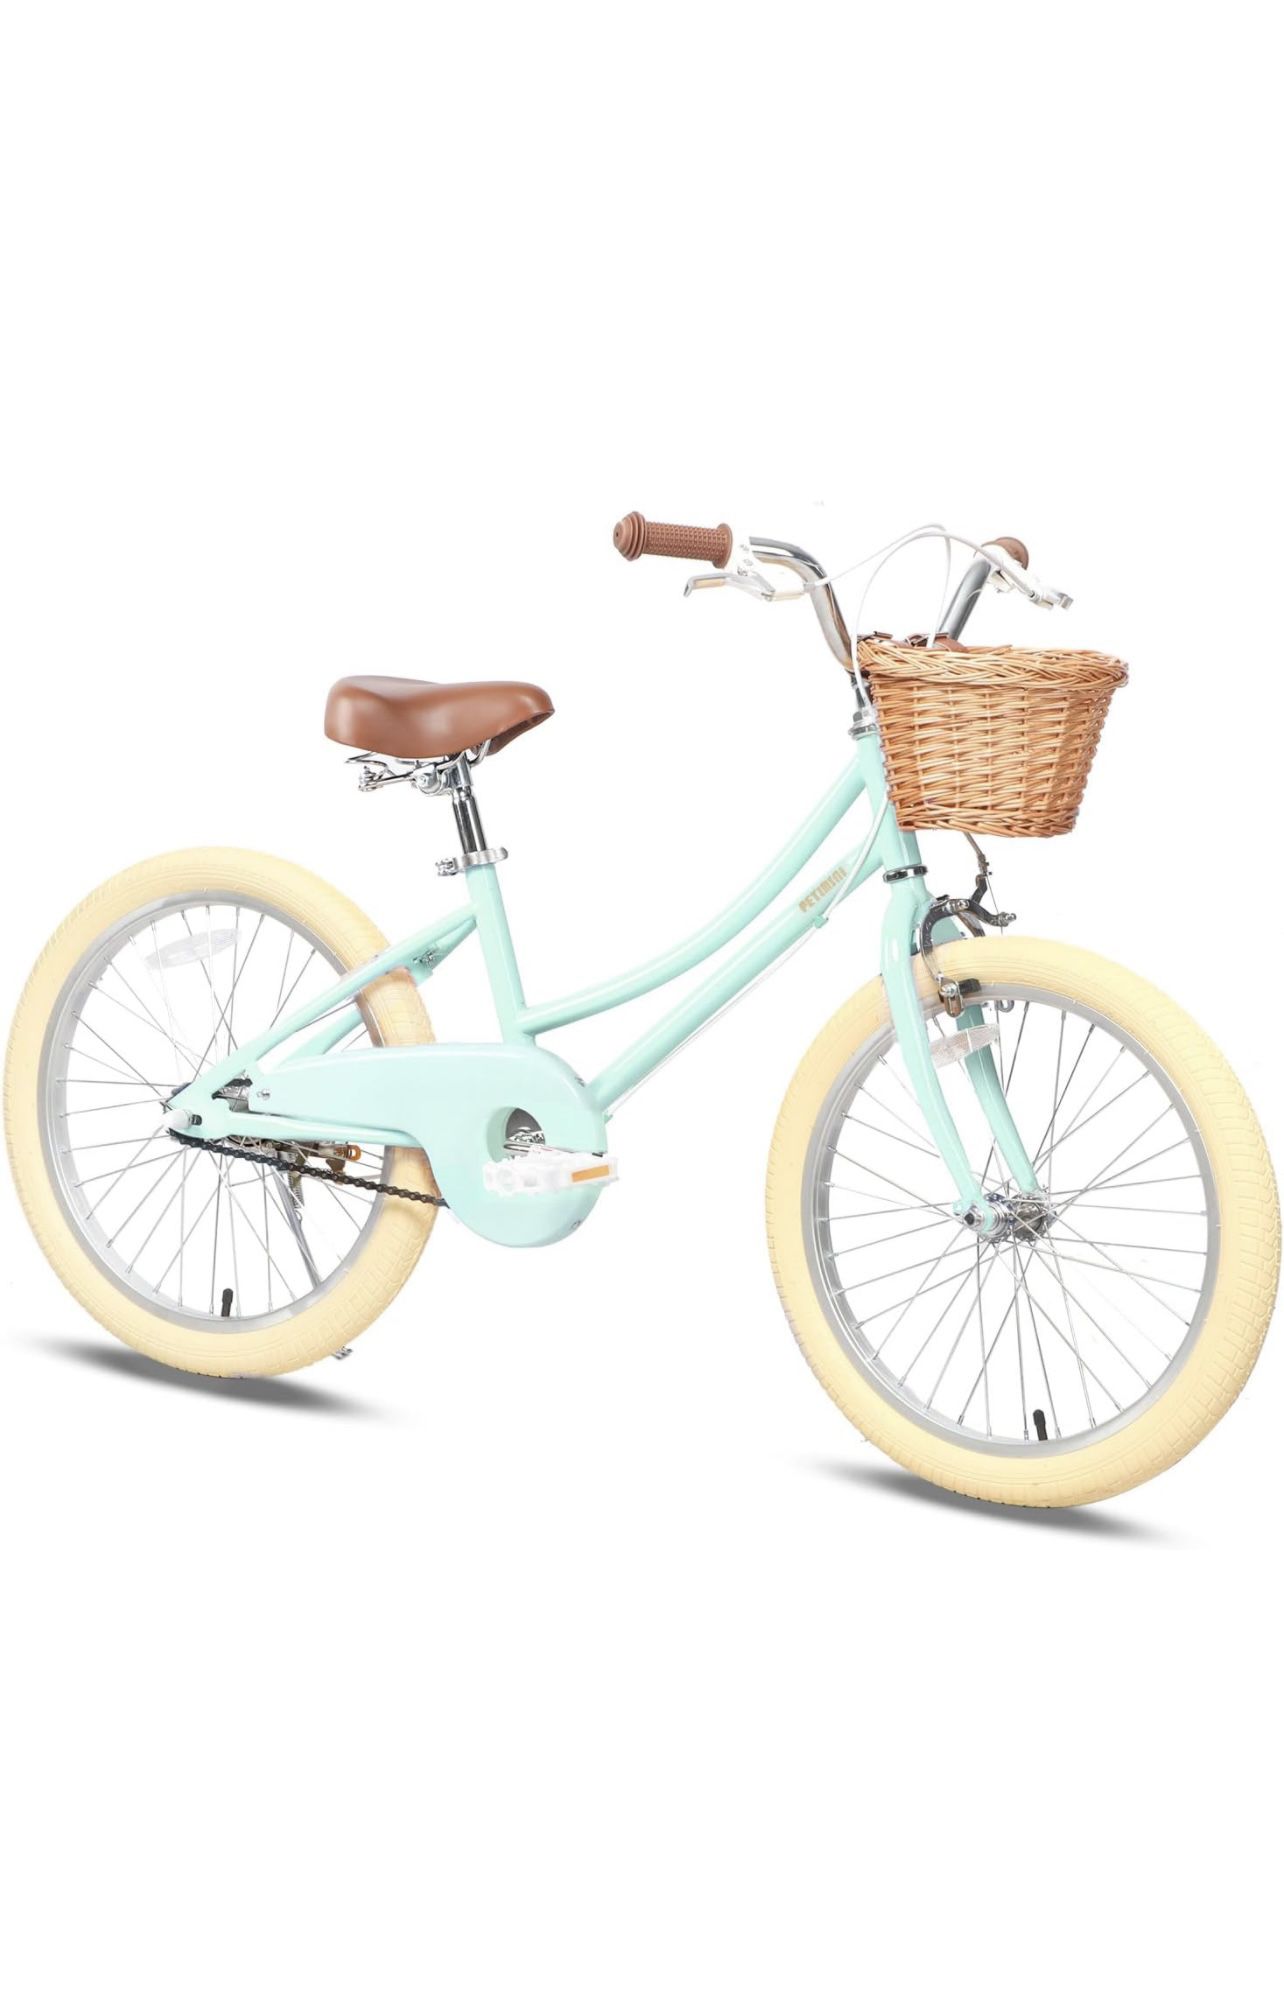 Petimini Girls Bike with Basket for 2-12 Years Old Kids(new)